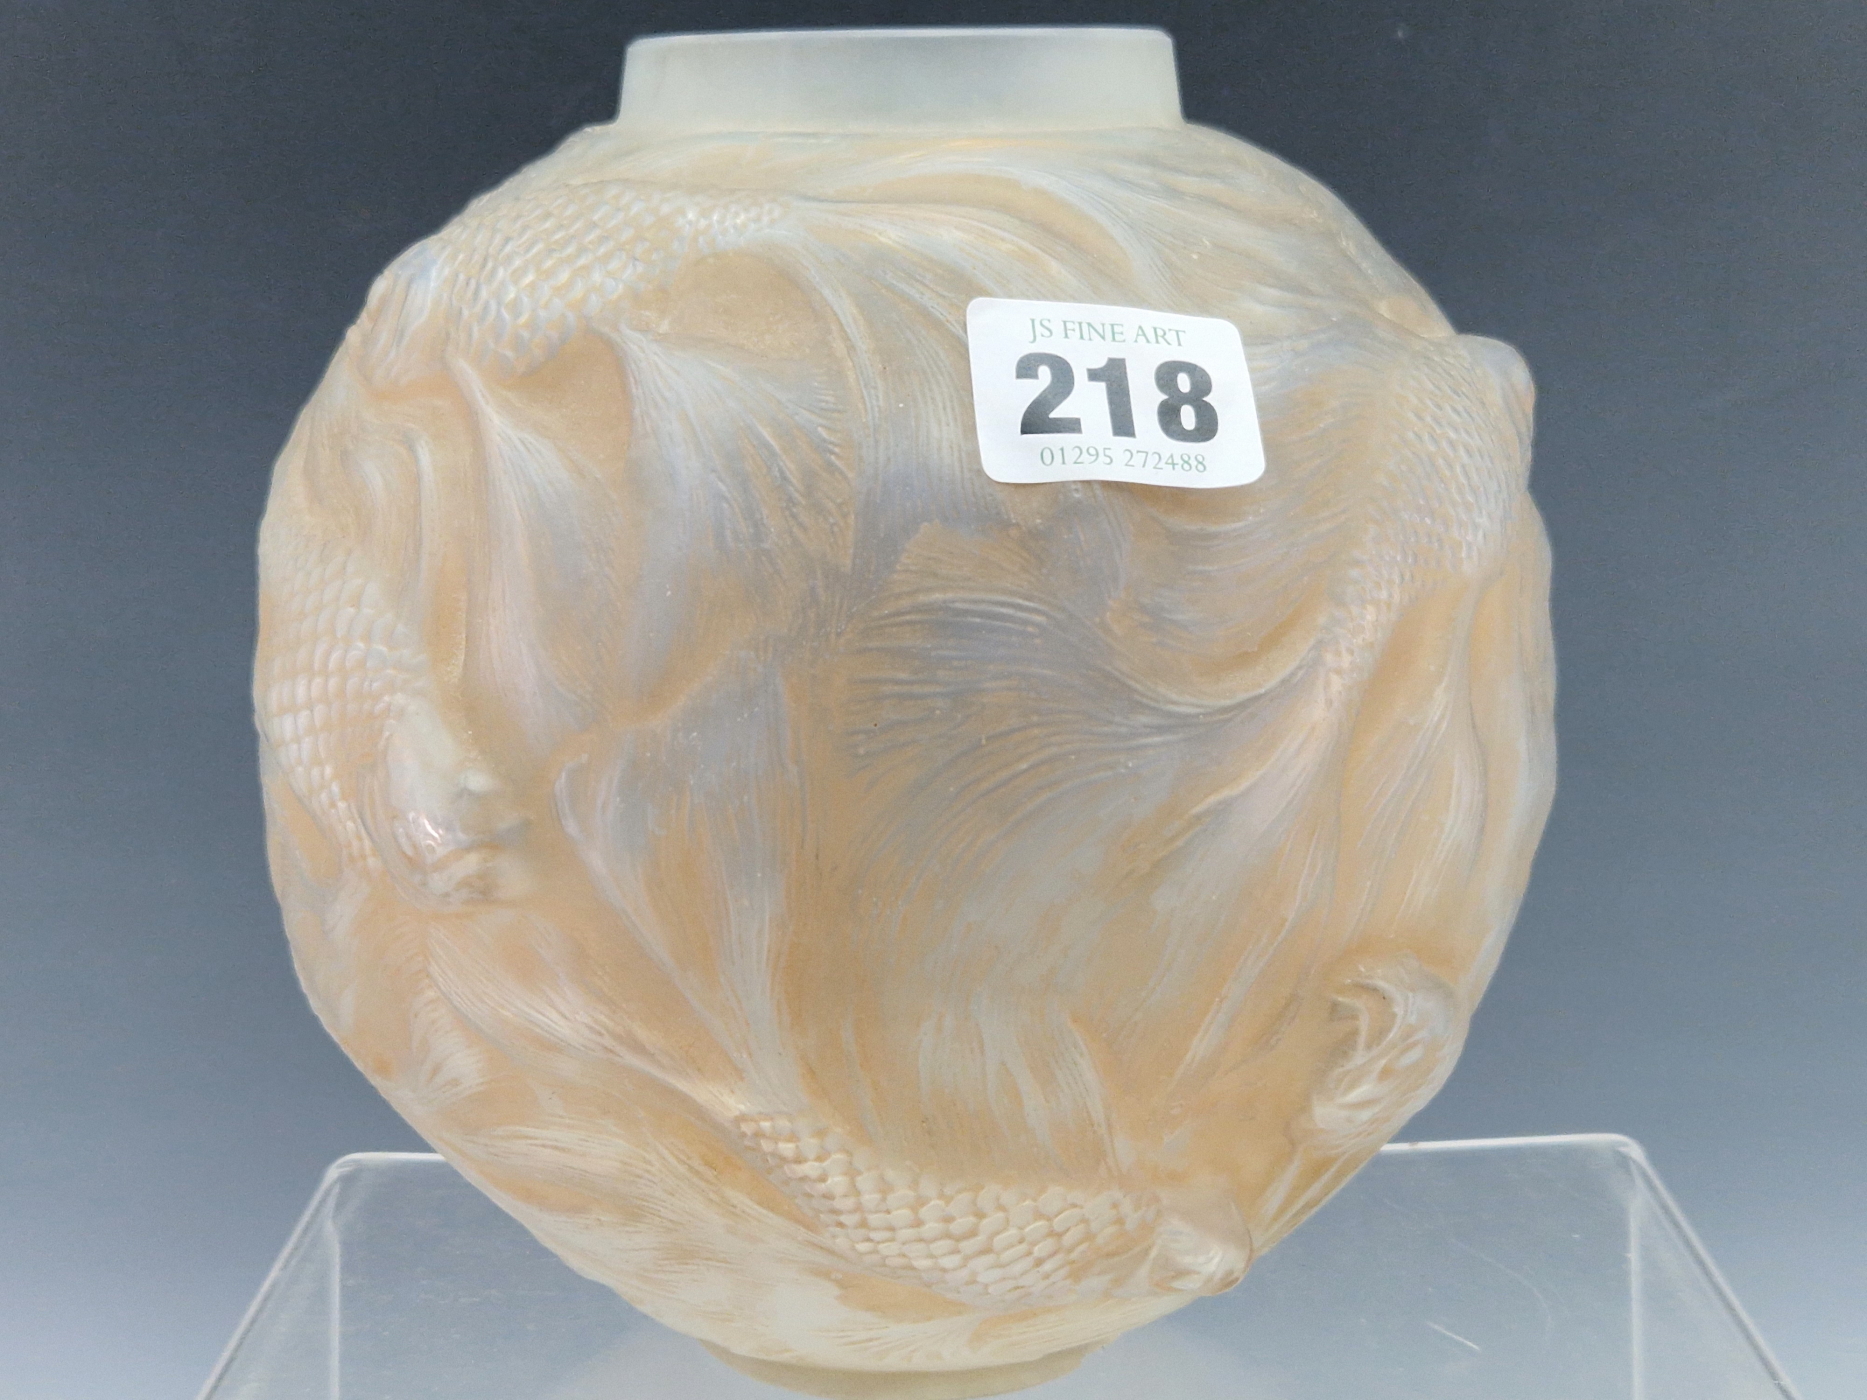 A LALIQUE FORMOSE PATTERN SPHERICAL VASE, THE FISH AGAINST A PALE BROWN GROUND, ENGRAVED R LALIQUE - Image 4 of 5